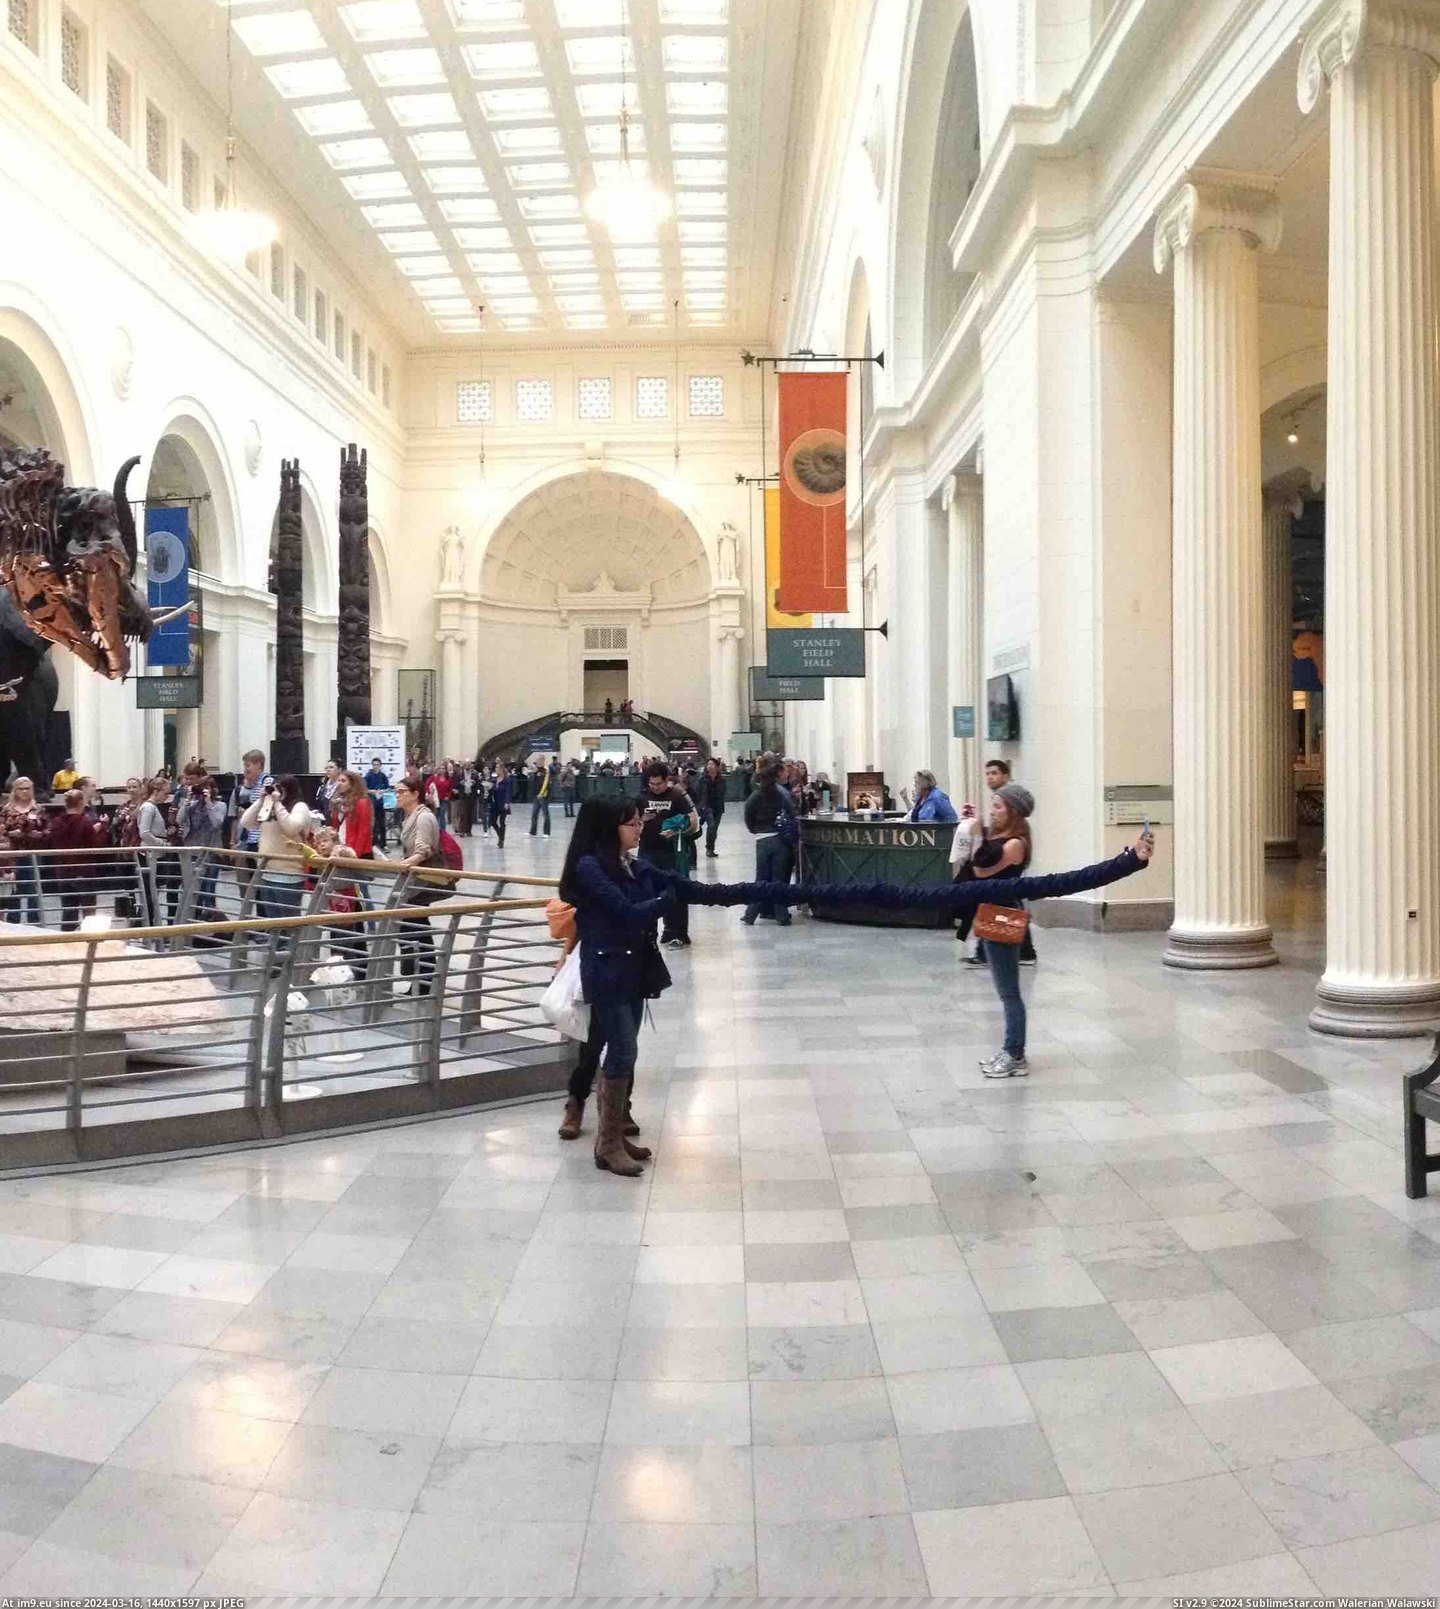 #Girl #Photo #Selfie #Ultimate #Panoramic #Ended #Making #Museum #Hand [Pics] took a panoramic photo at a museum and ended up making it look like this girl has the ultimate selfie hand. Pic. (Obraz z album My r/PICS favs))